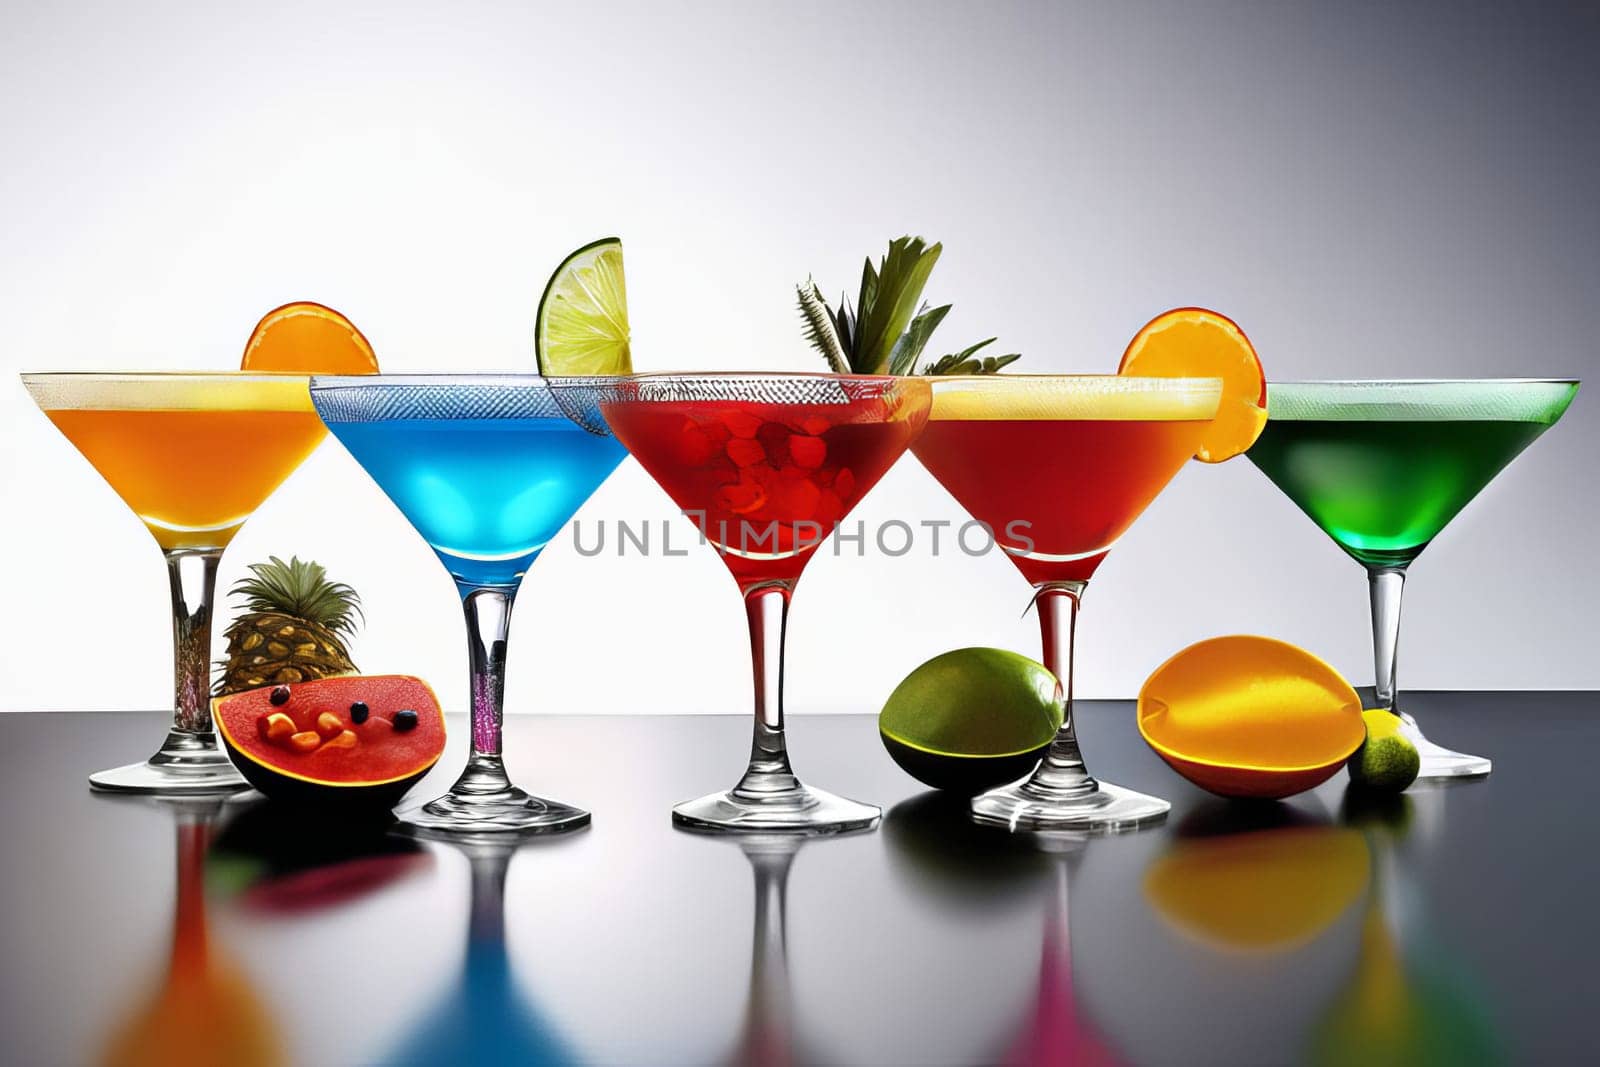 A vibrant and colorful display of cinco de mayo cocktails surrounded by festive decorations, creating a perfect setting for a celebratory fiesta or party